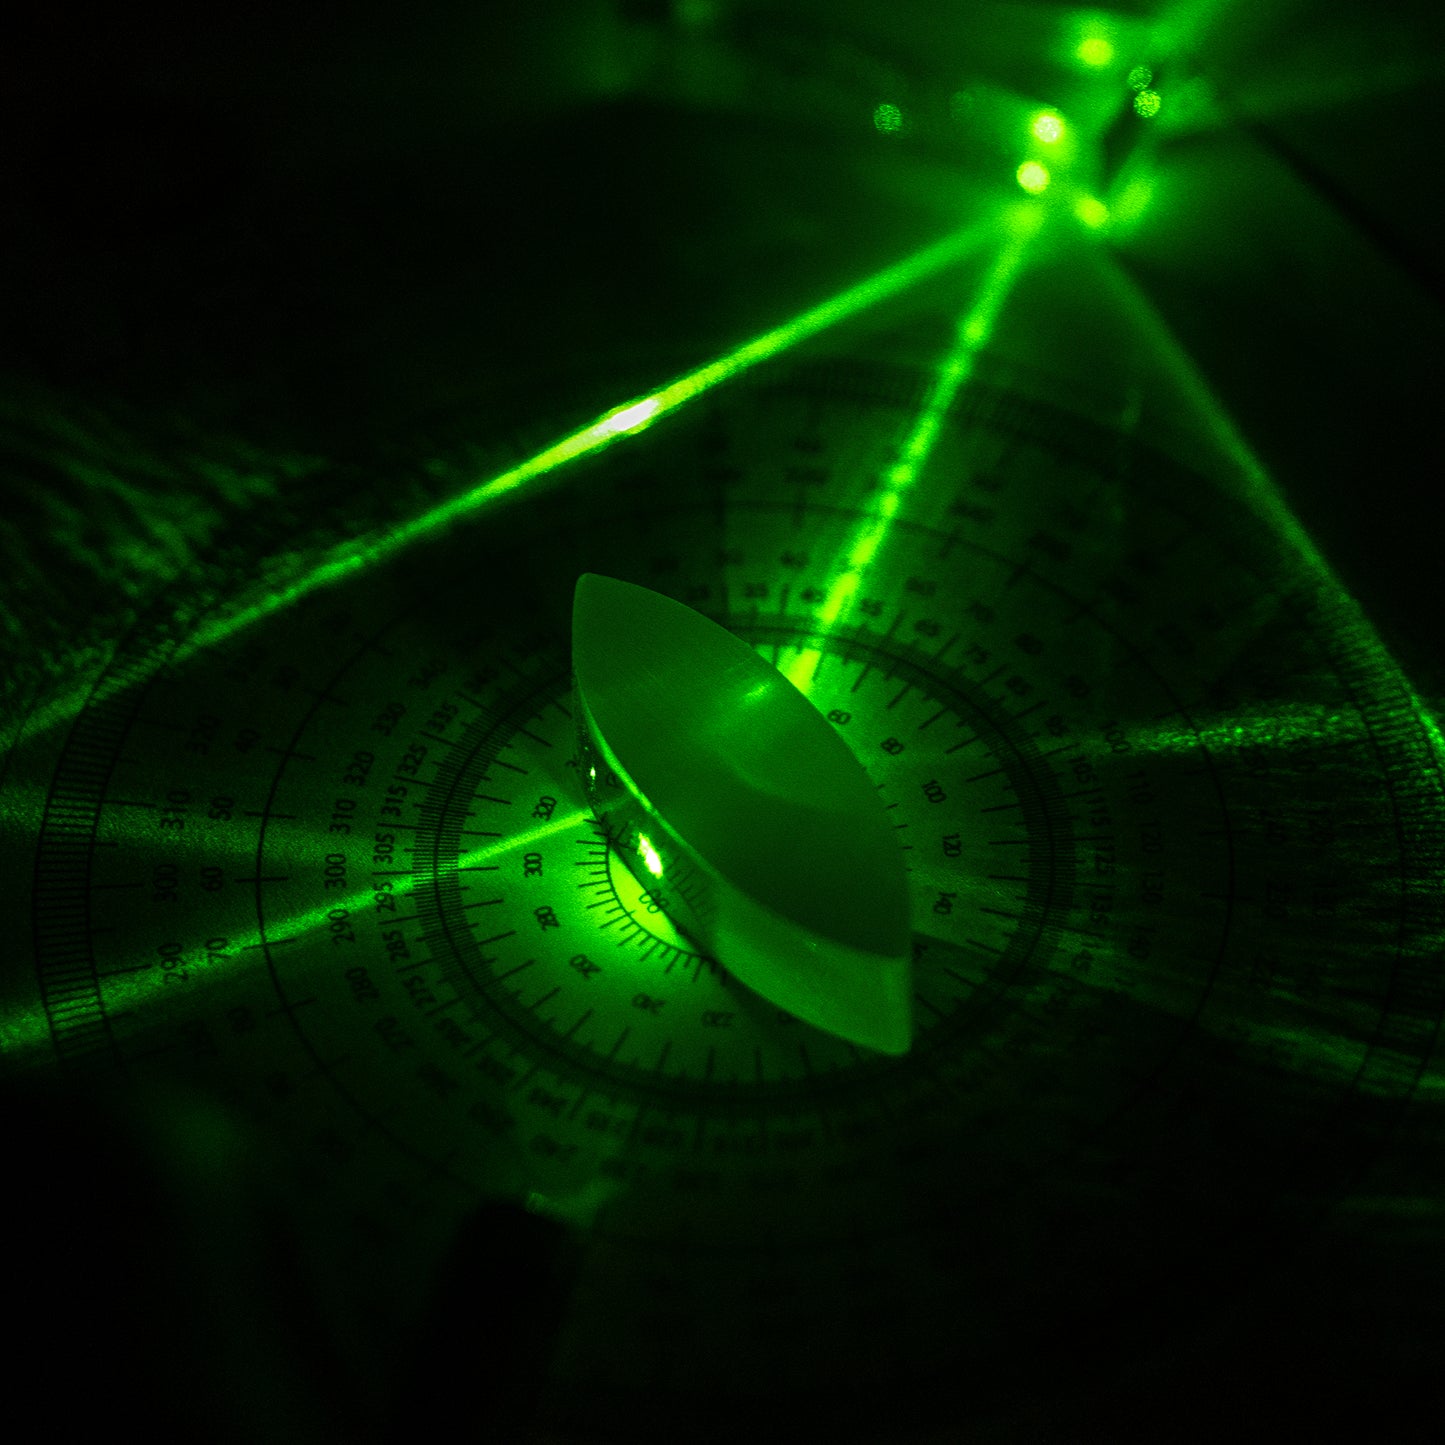 red and green laser pointer for classroom optical lens experiments on protractor and convex lens